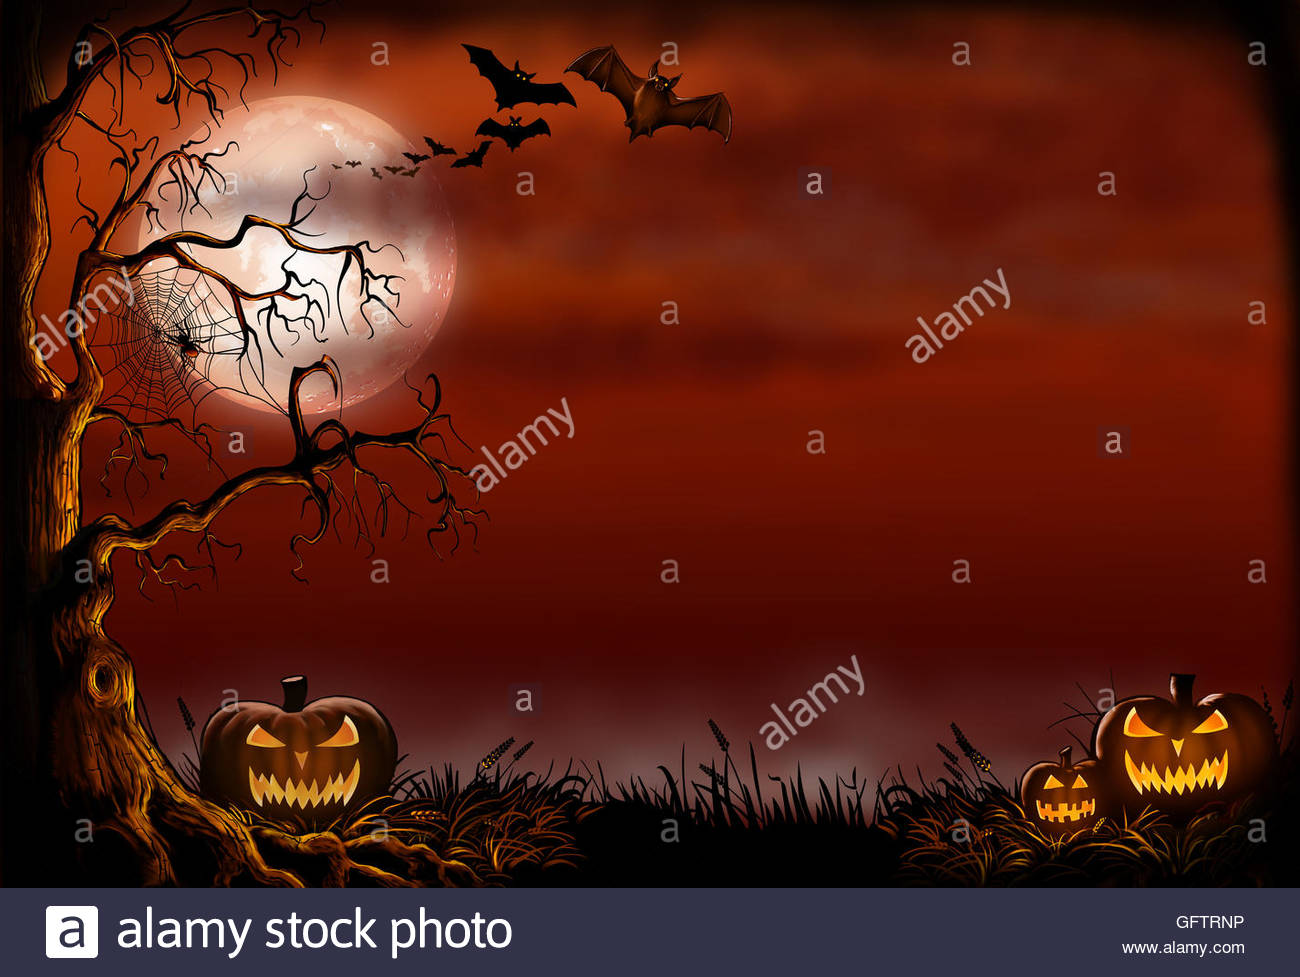 Halloween Background With A Creepy Tree Bats And Evil Pumpkins